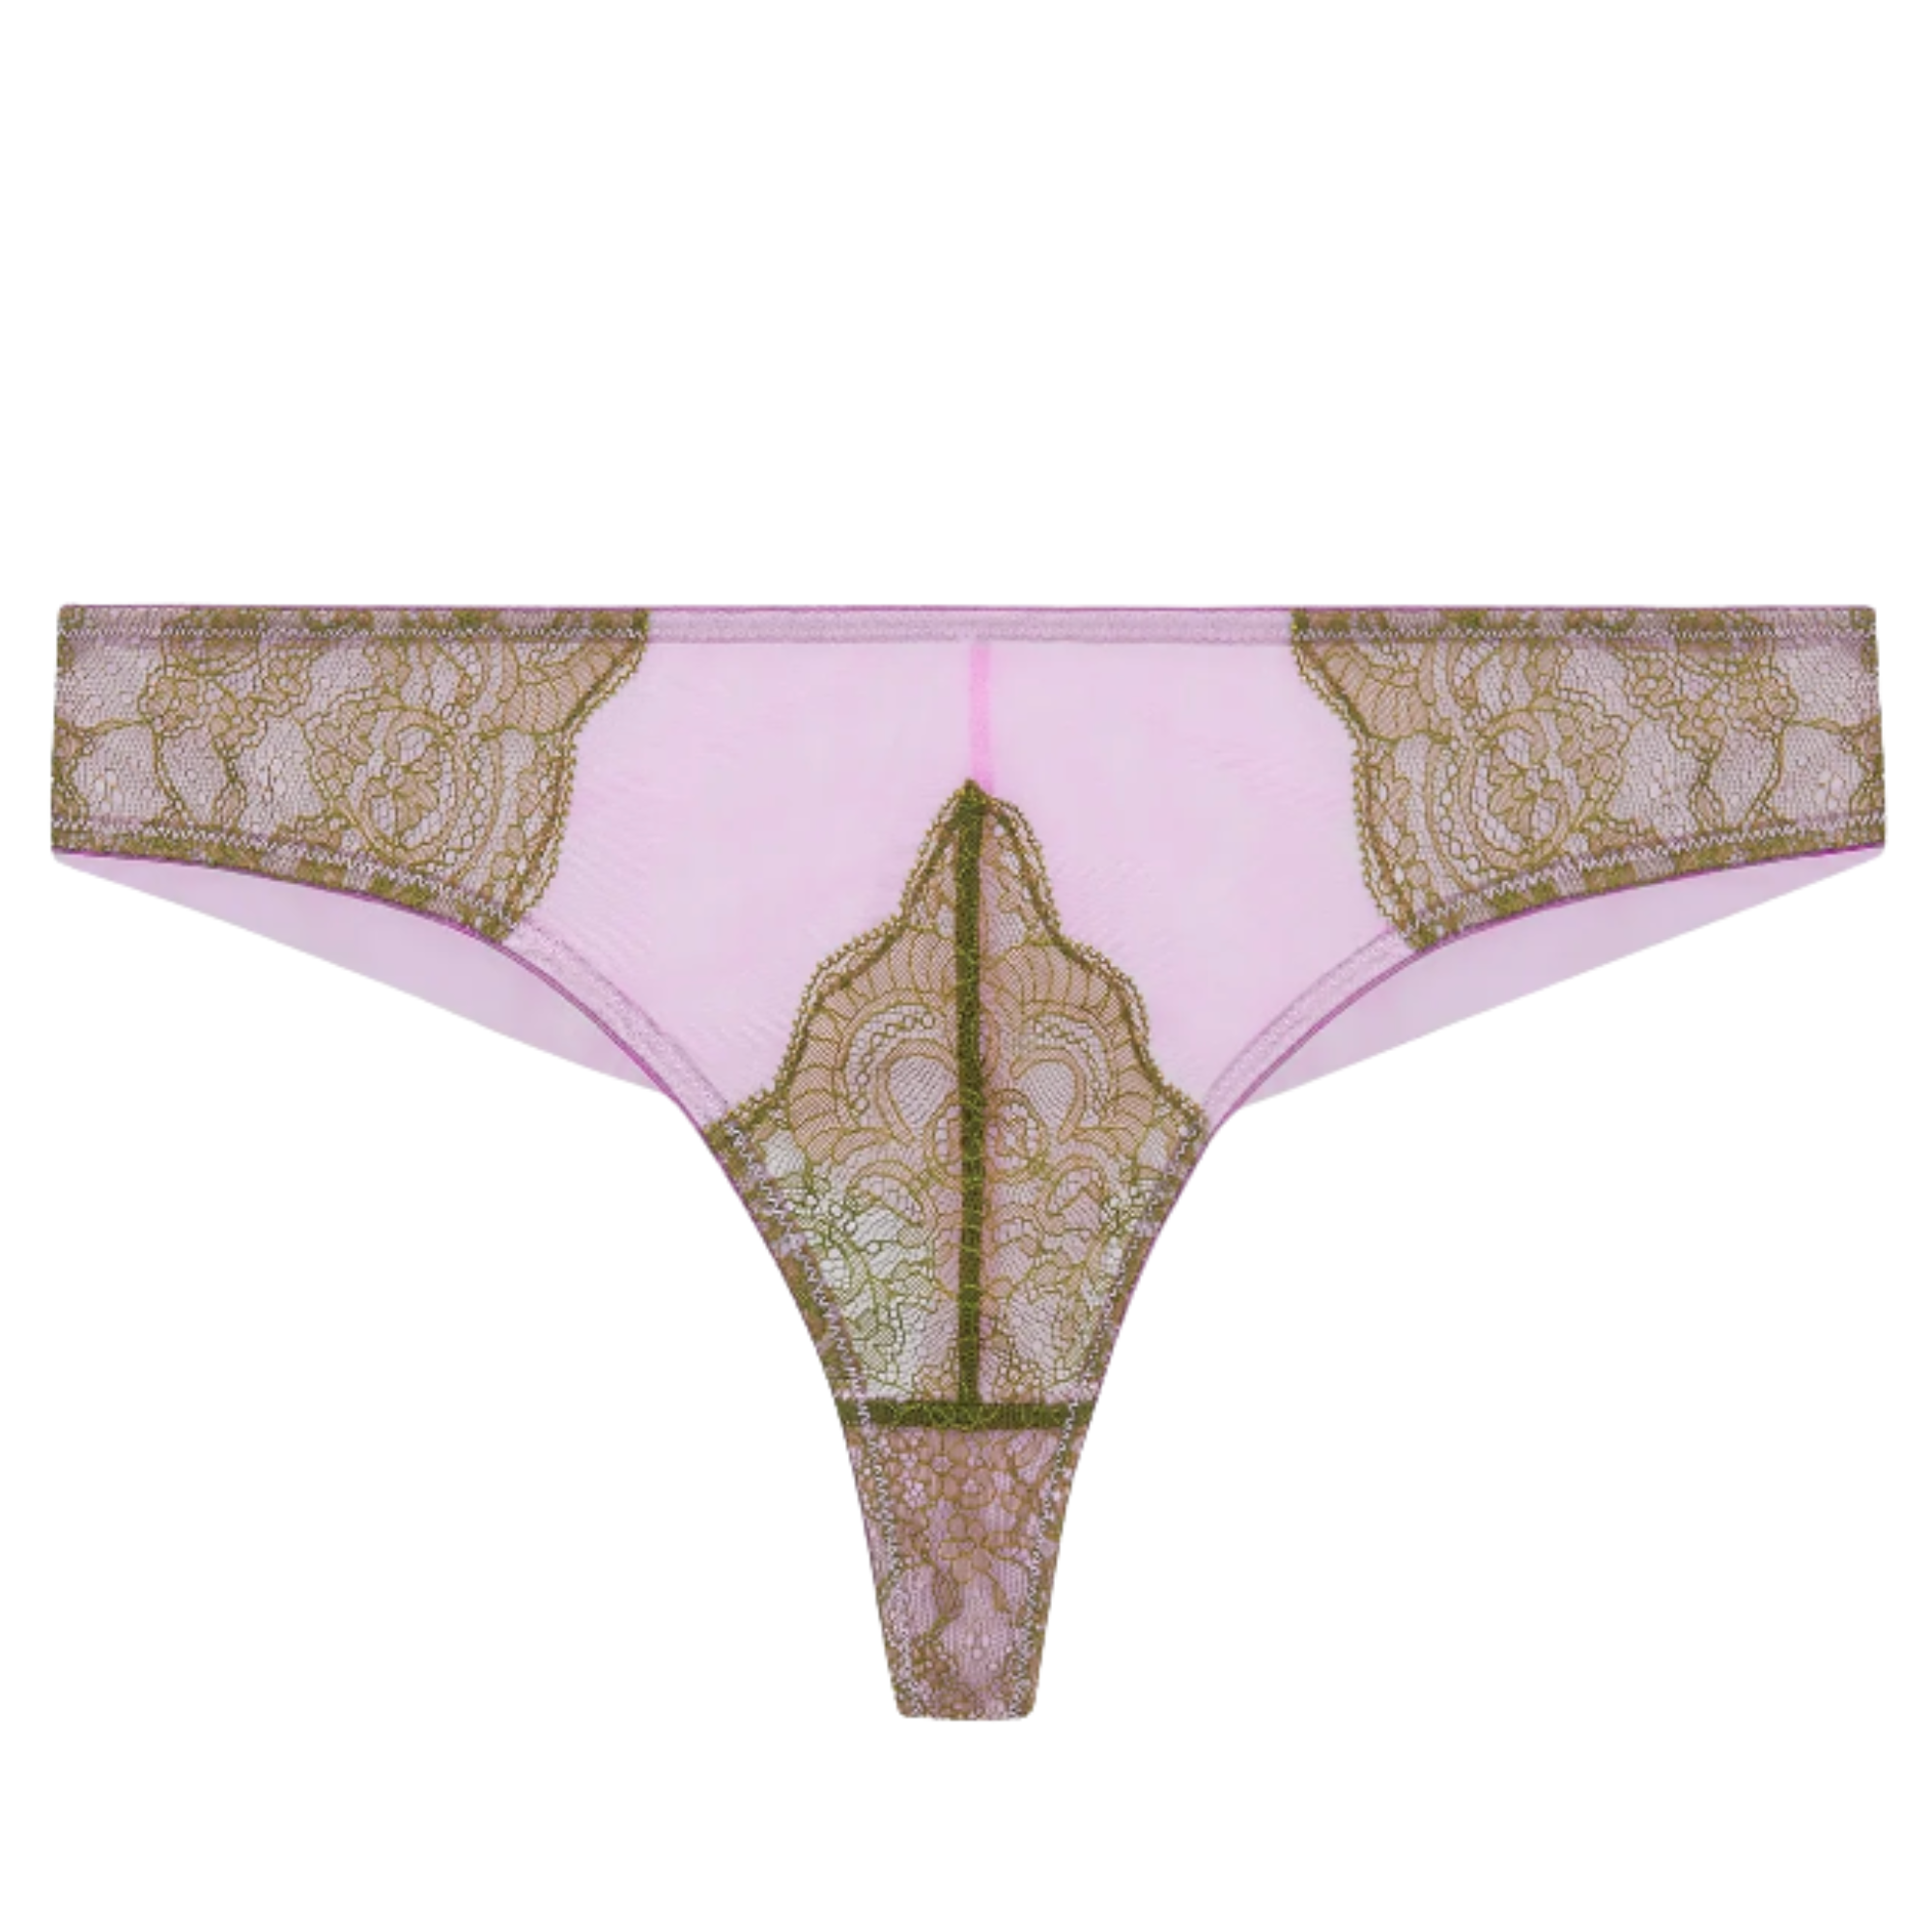 Dora Larsen Raven Lace Knicker in green and pink 